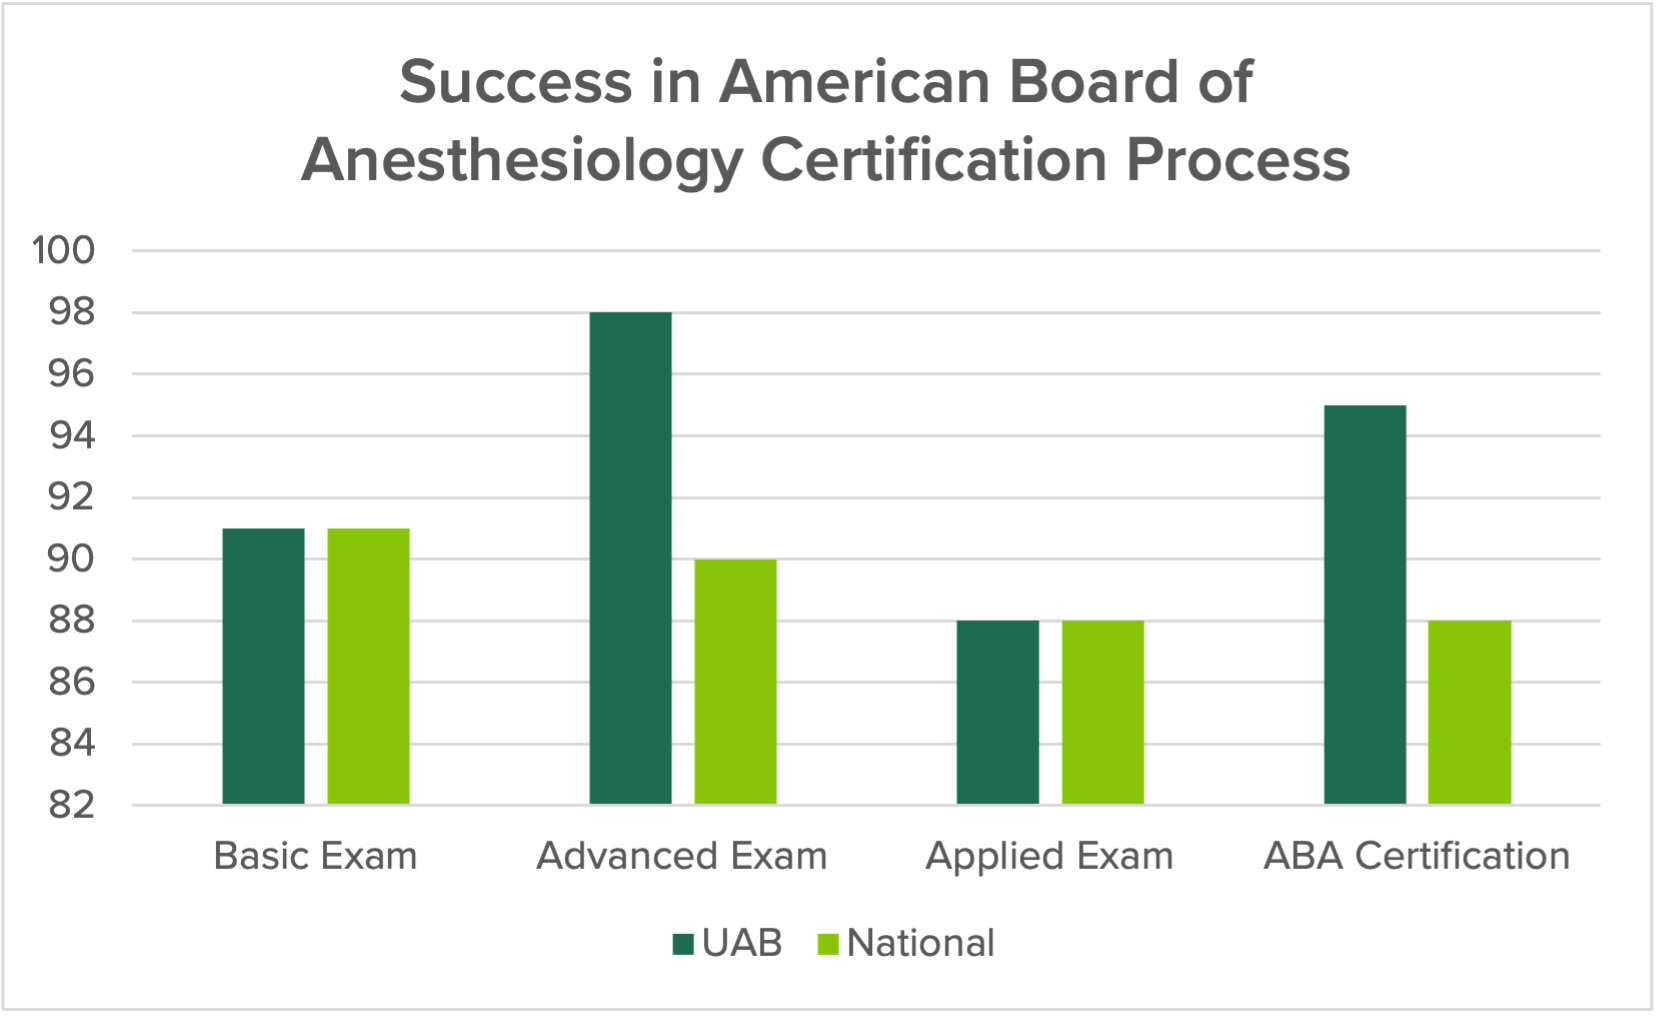 Success in American Board of Anesthesiology Certification Process